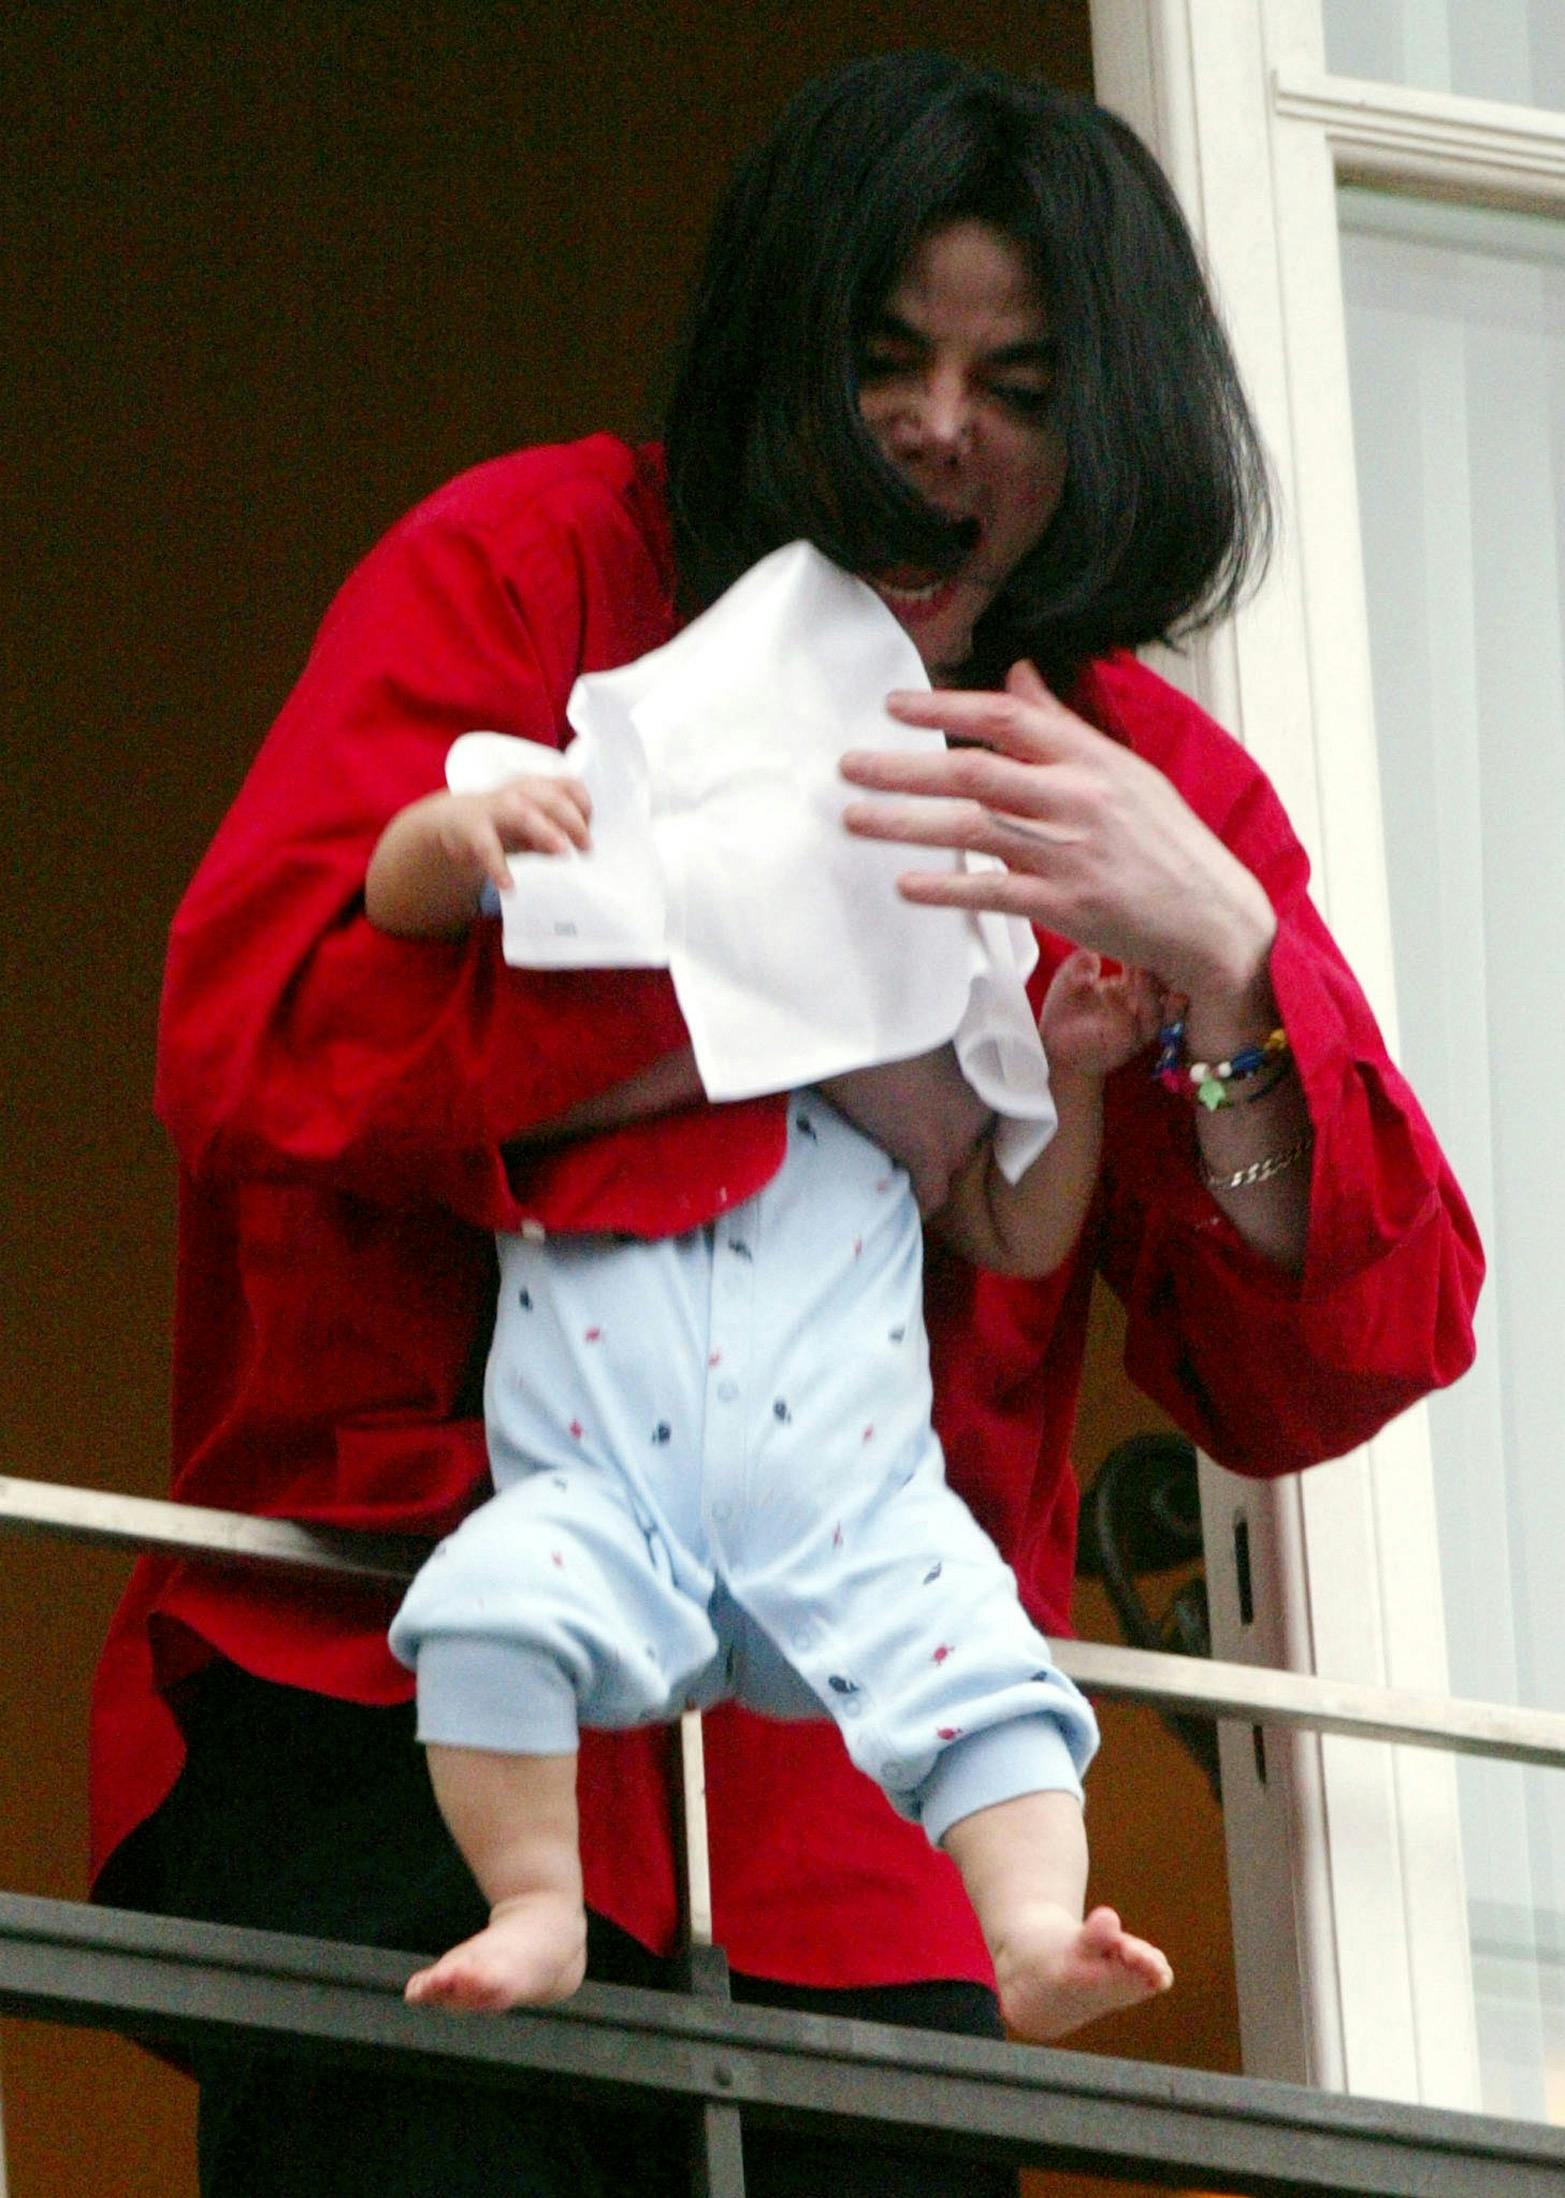 Singer Michael Jackson is pictured holding a child out of a window as he looks at fans after arriving at a Berlin hotel, in this November 19, 2002 file photo. Pop giant Michael Jackson, who took to the stage as a child star and set the world dancing to exuberant rhythms for decades, died on June 25, 2009, after being taken ill at his home, the Los Angeles Times said. He was 50. REUTERS/Tobias Schwarz/Files (GERMANY)